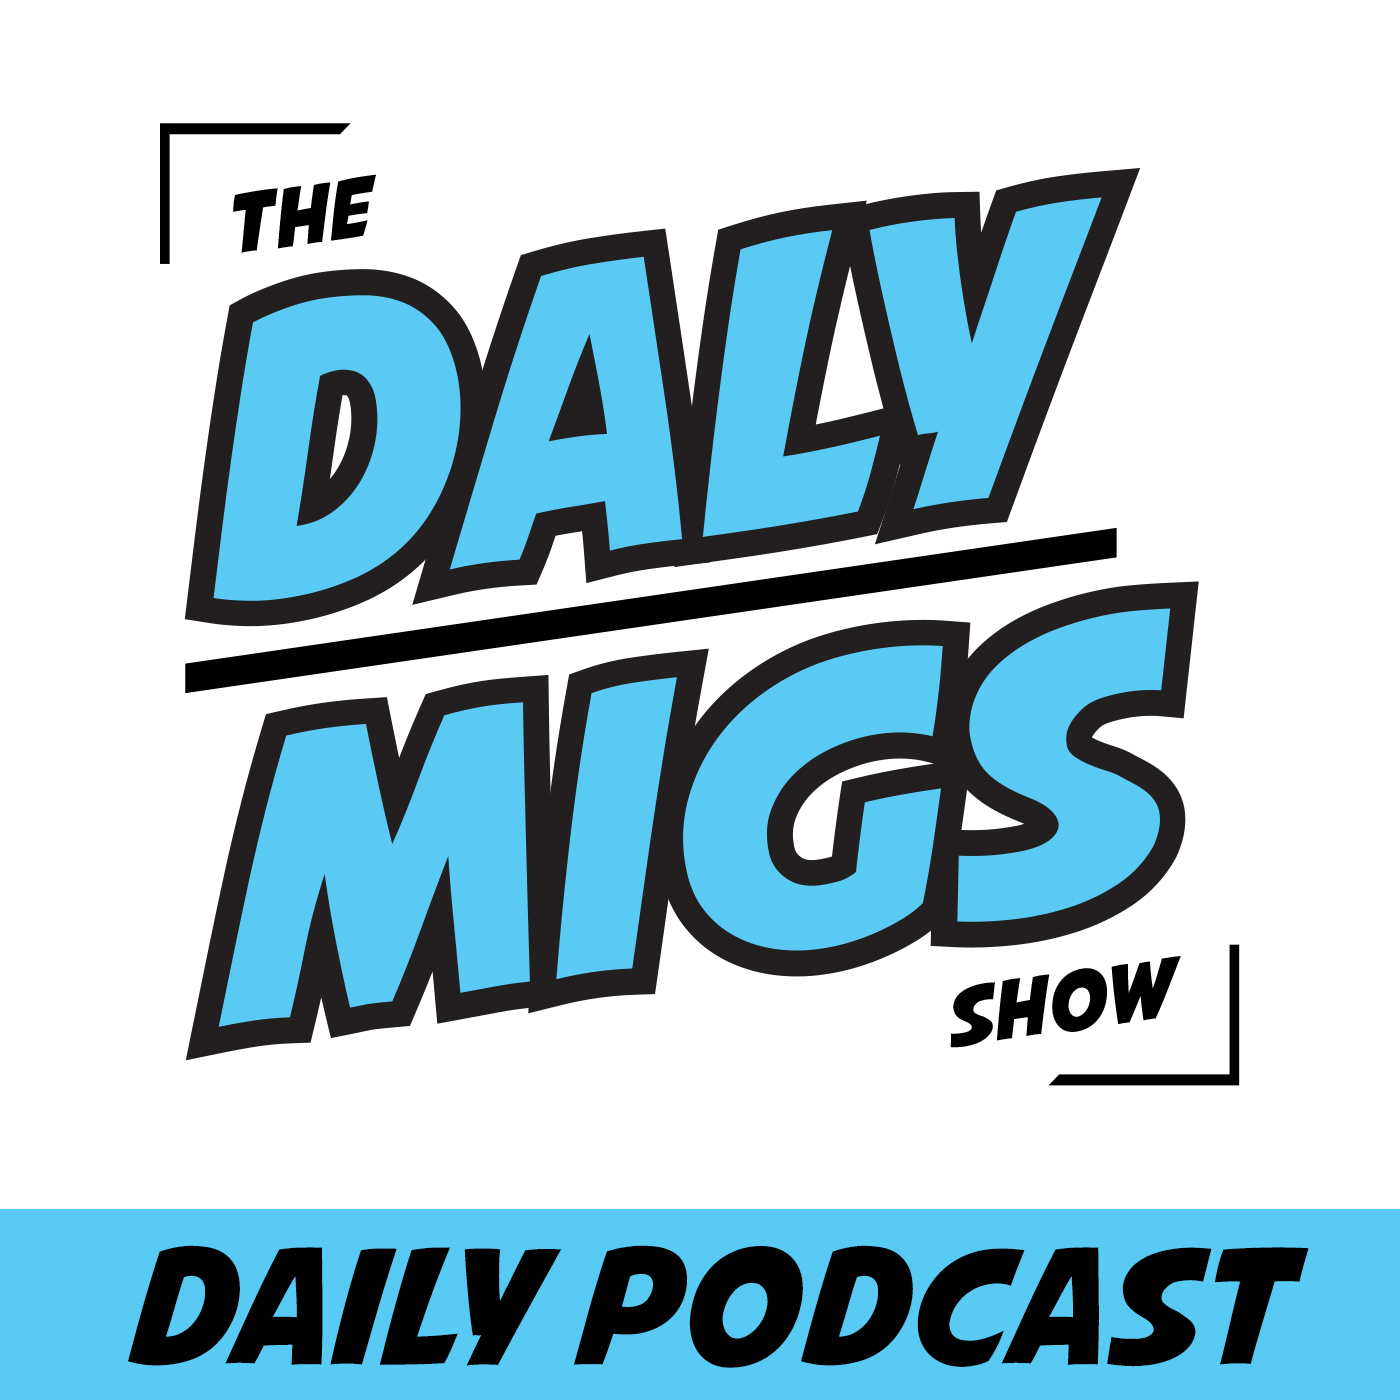 Daily Podcast pt. 1 - "A fight broke out at a golf tournament!"